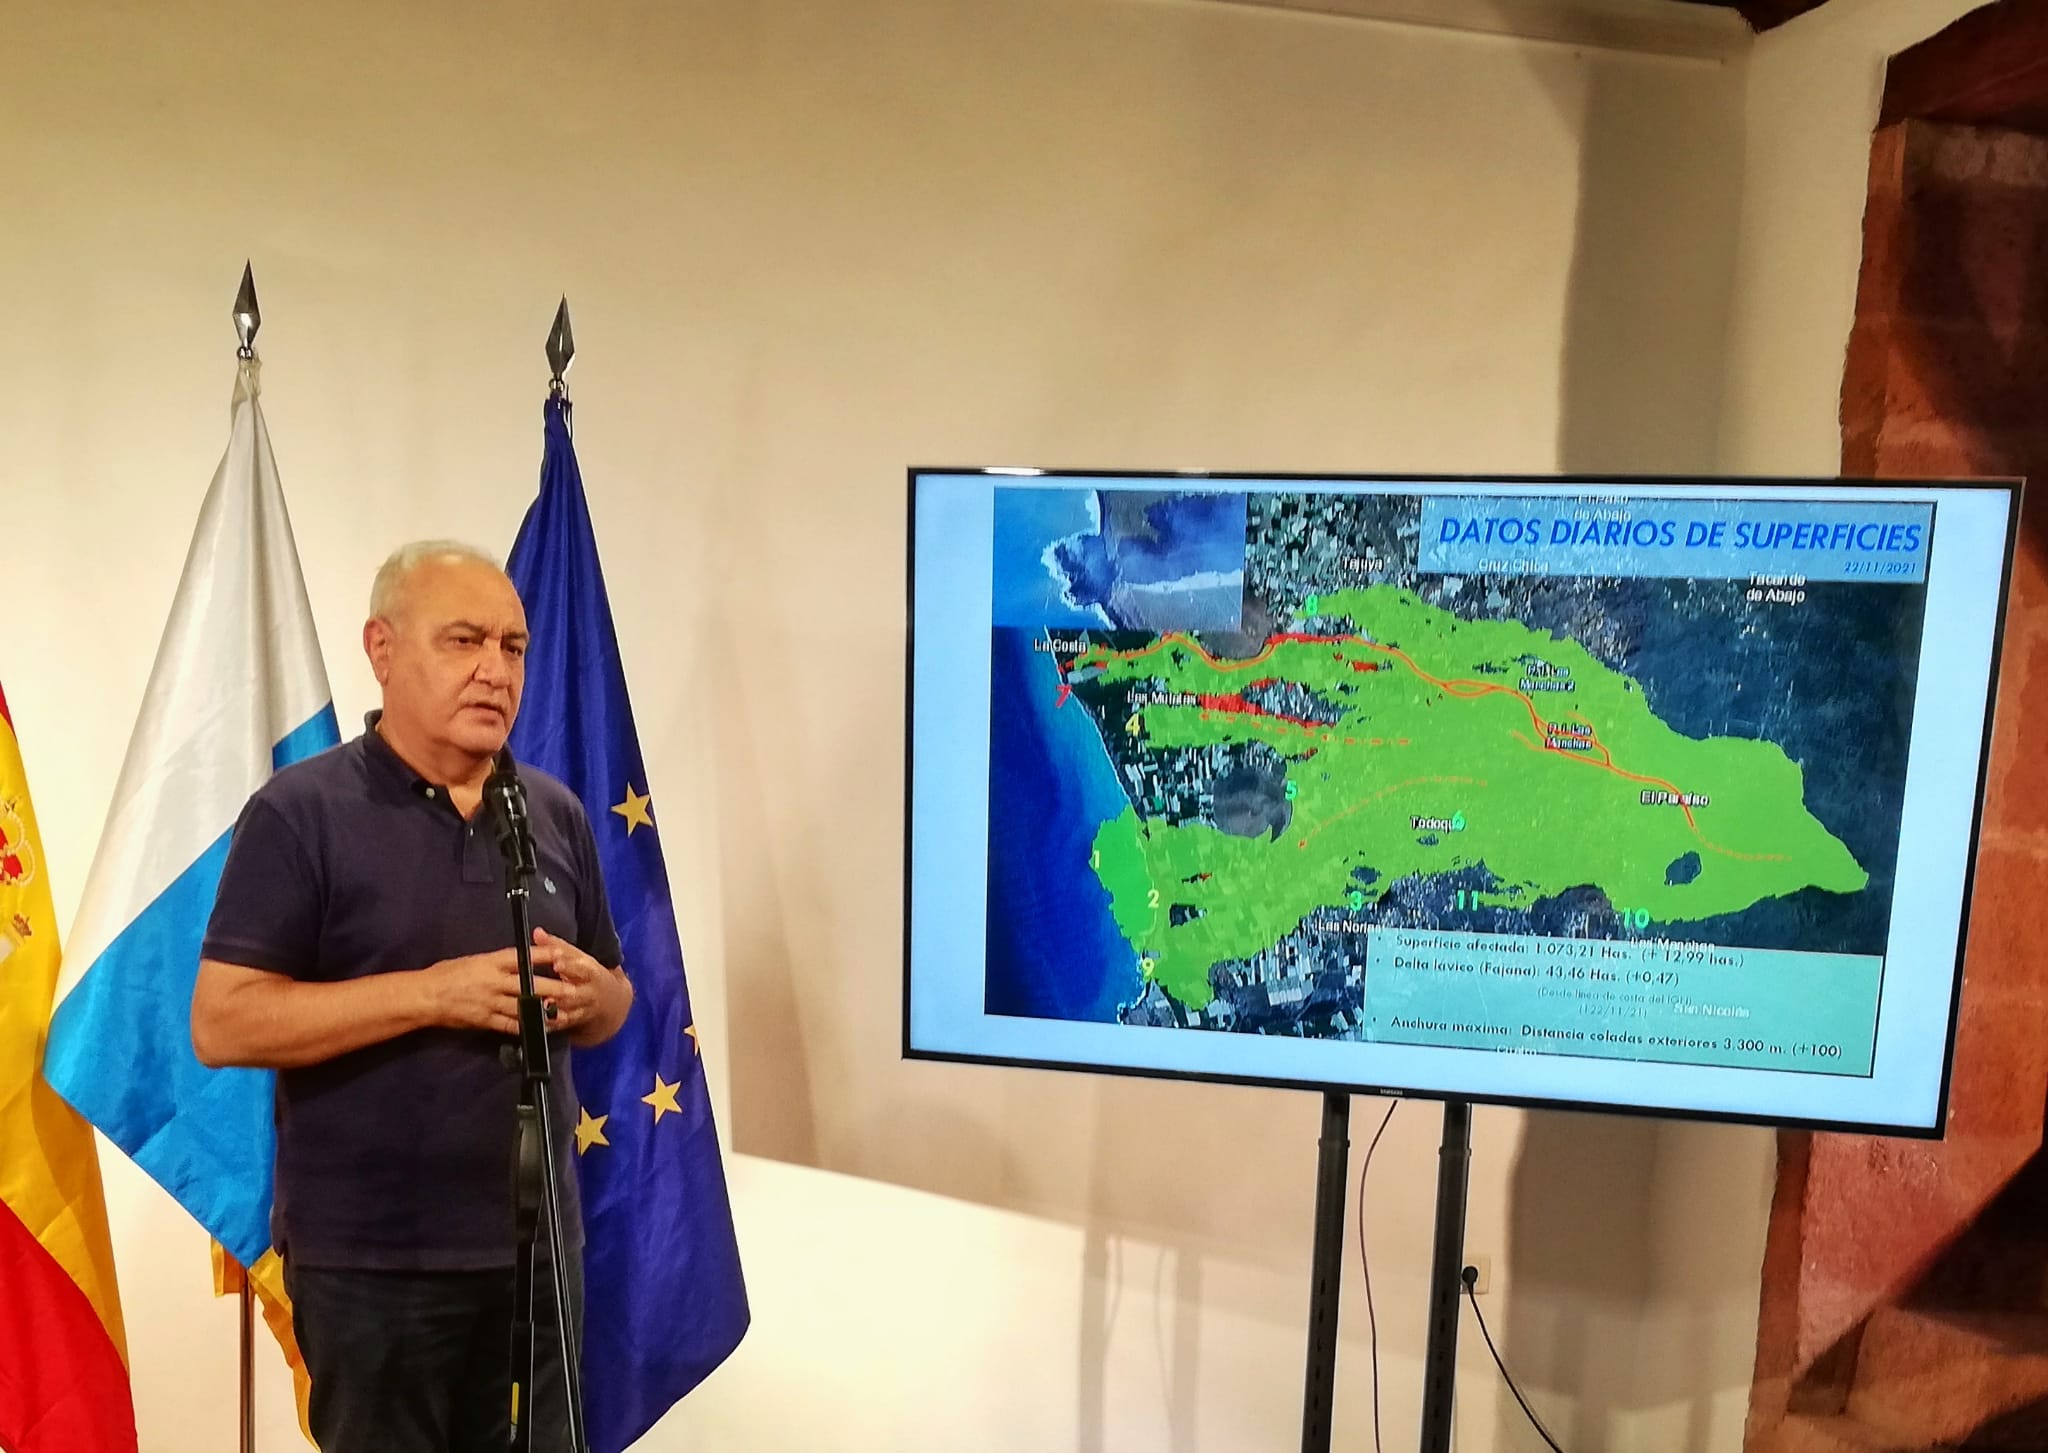 This photo is of the technical director of PEVOLCA at a press conference discussing the daily changes of the lava flow inundation on the 23rd of November. Sourced from Gobierno de Canarias (2021).